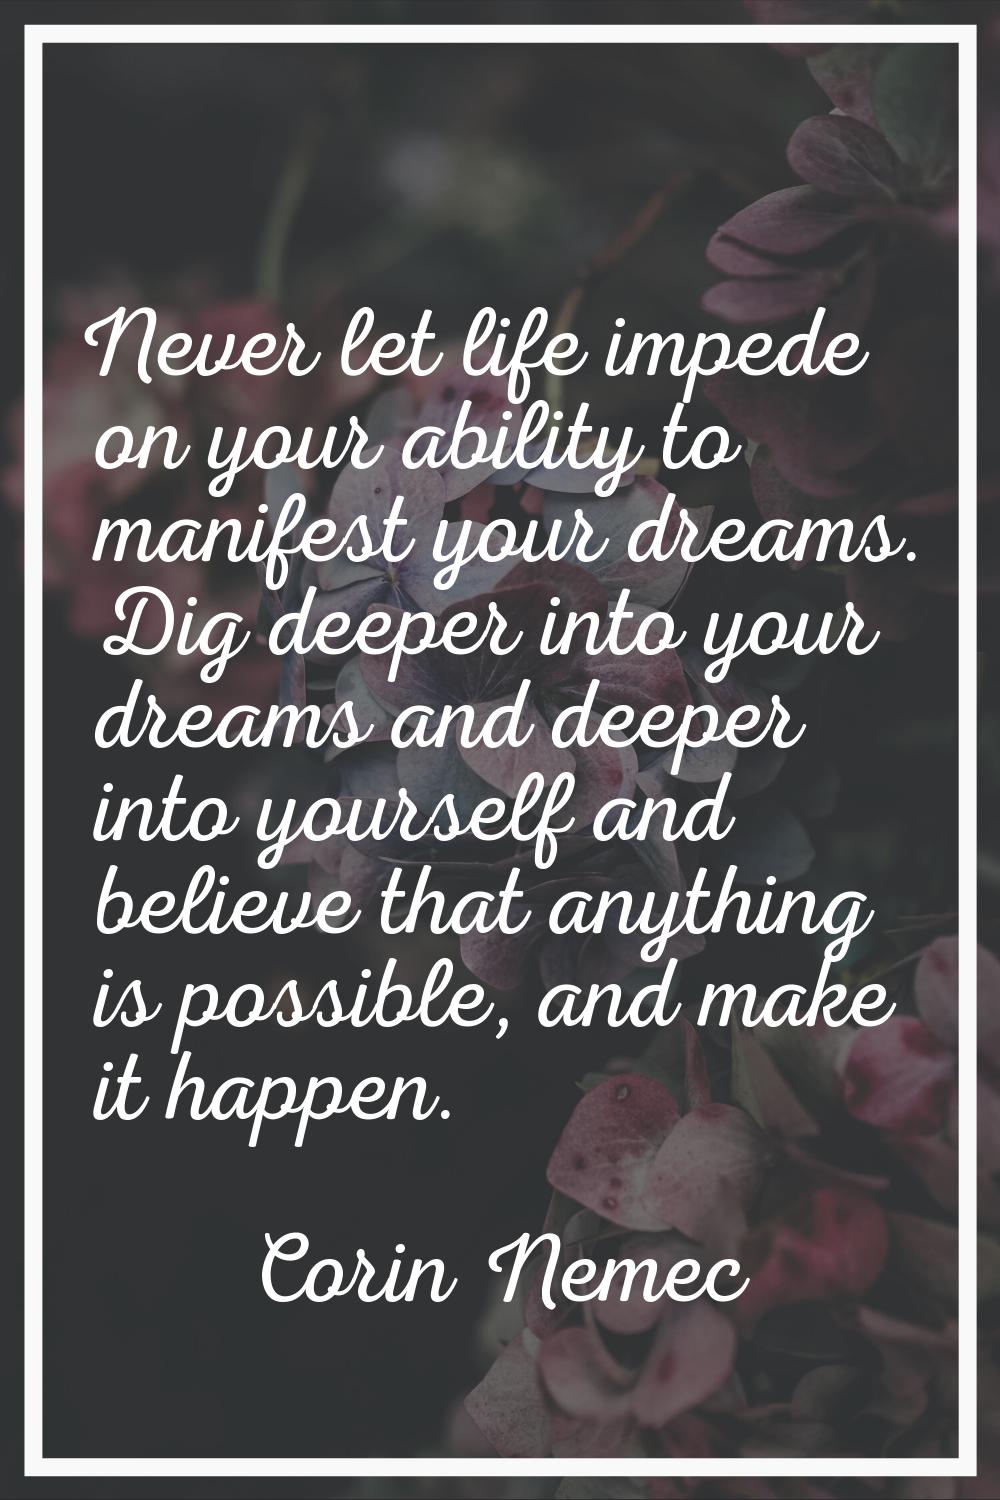 Never let life impede on your ability to manifest your dreams. Dig deeper into your dreams and deep